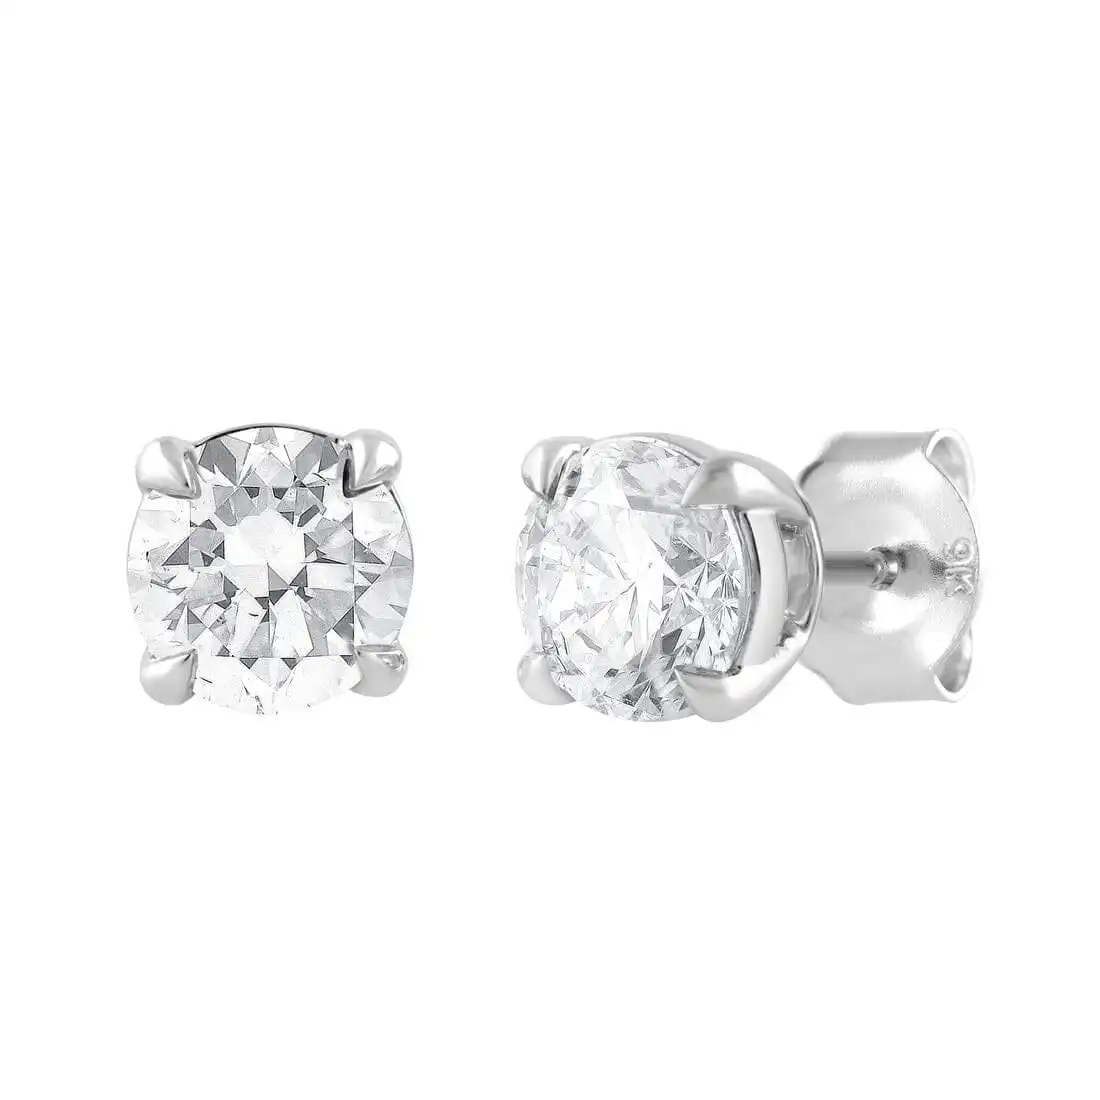 Meera Solitaire Earrings with 1.50ct of Laboratory Grown Diamonds in 9ct White Gold